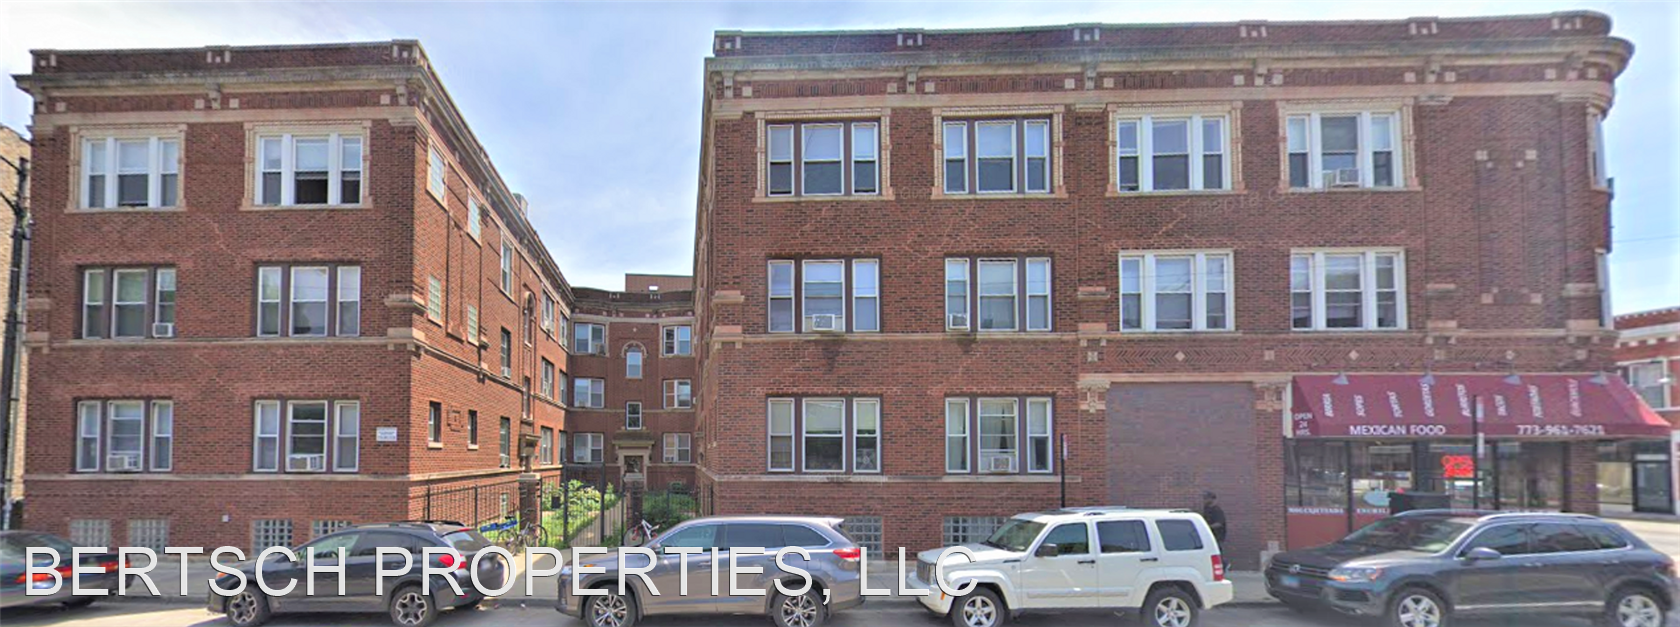 4751-4761 N CLARK ST | 1463-1473 W LAWRENCE AVE